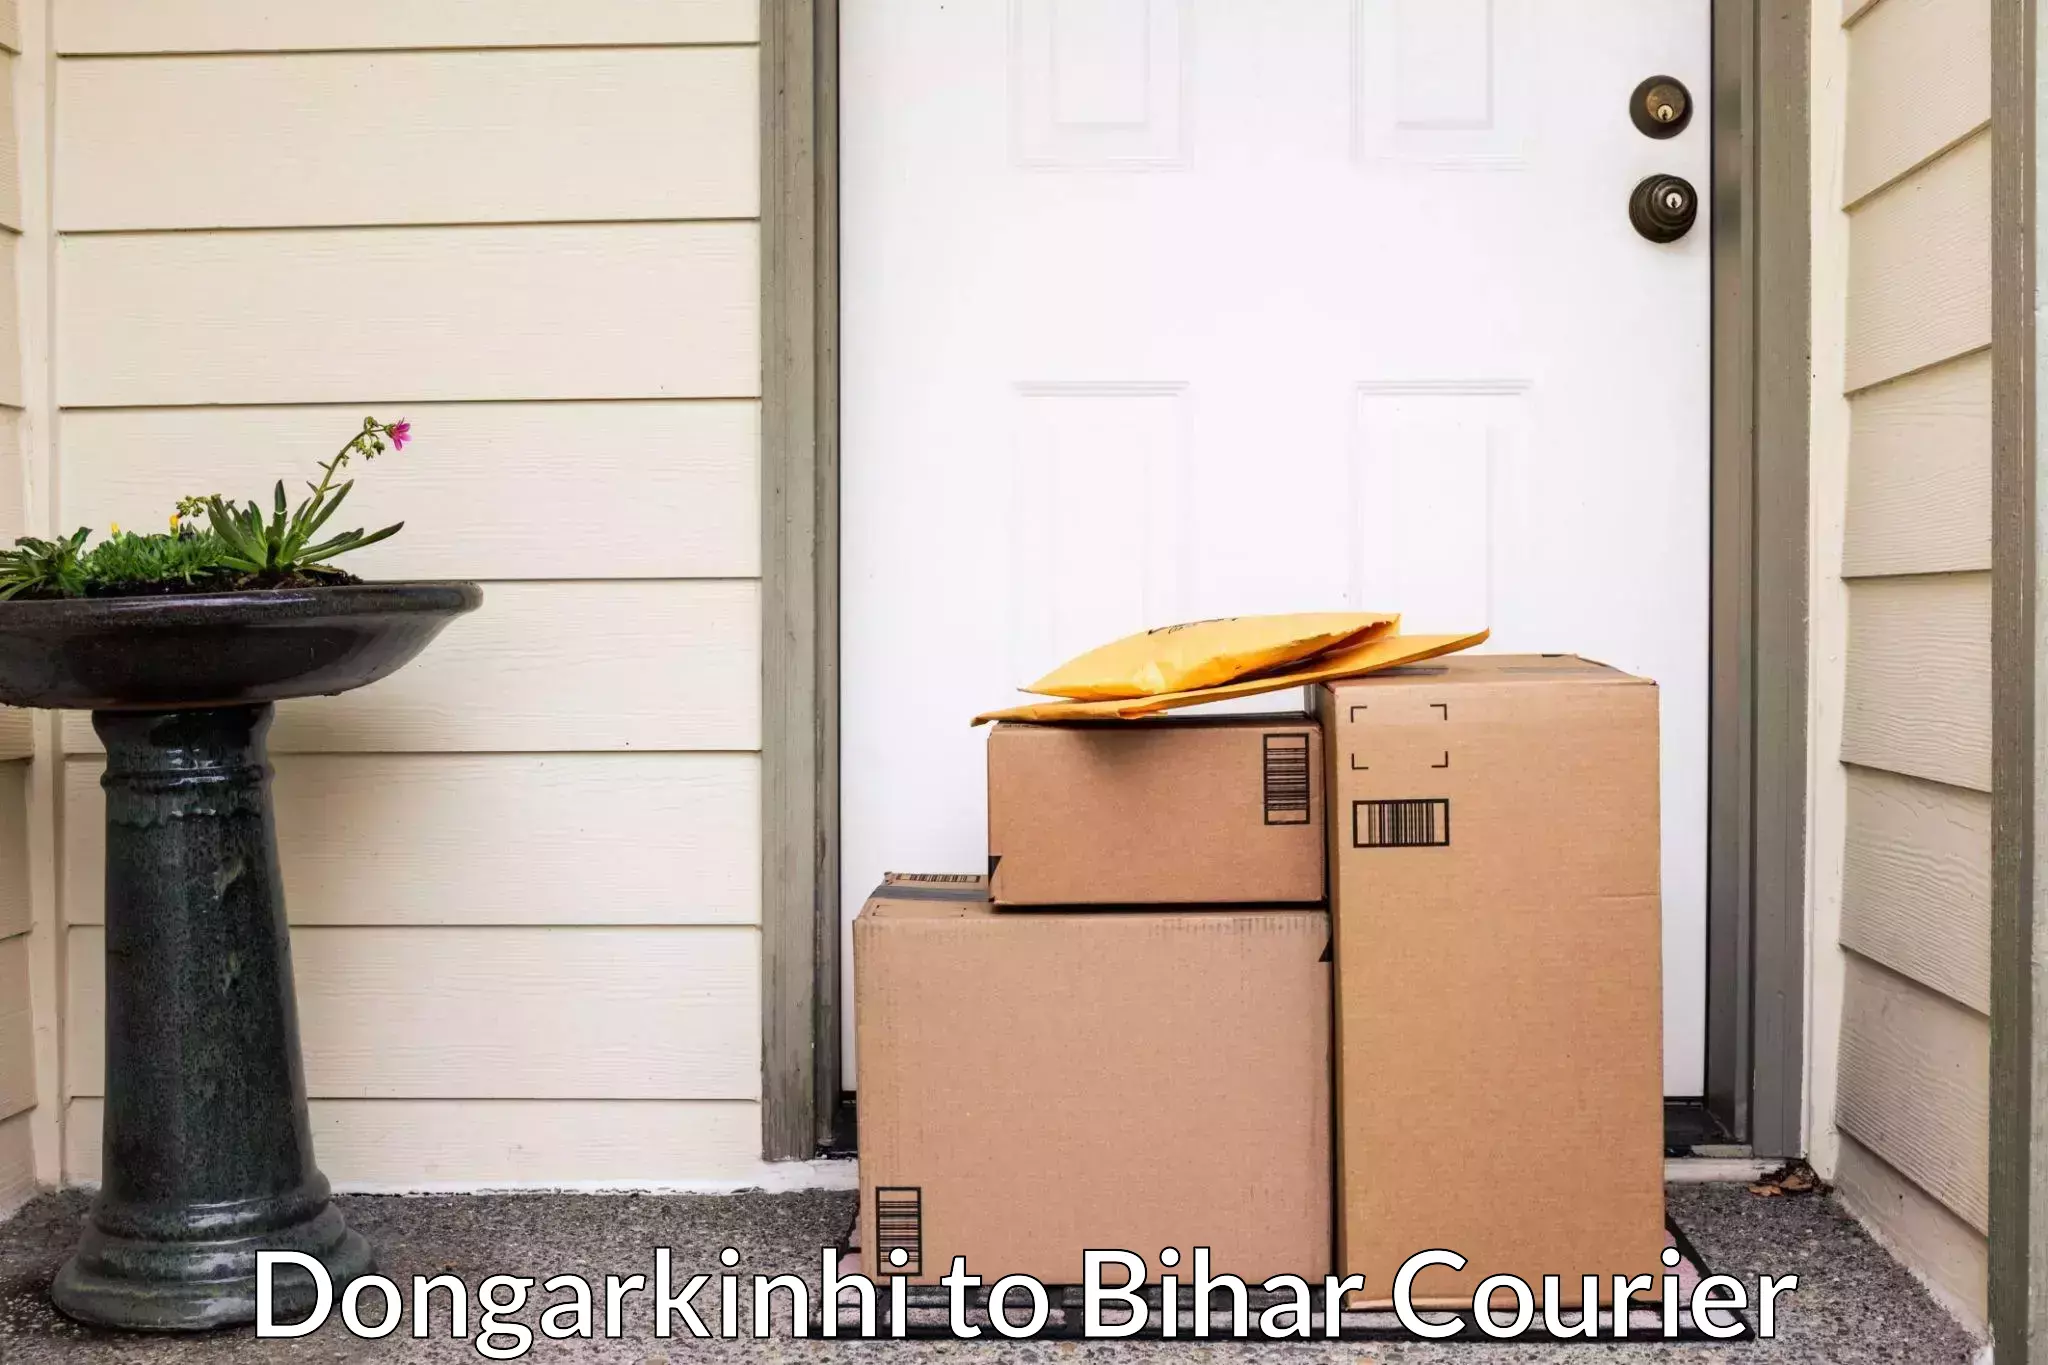 Professional moving company Dongarkinhi to Rohtas